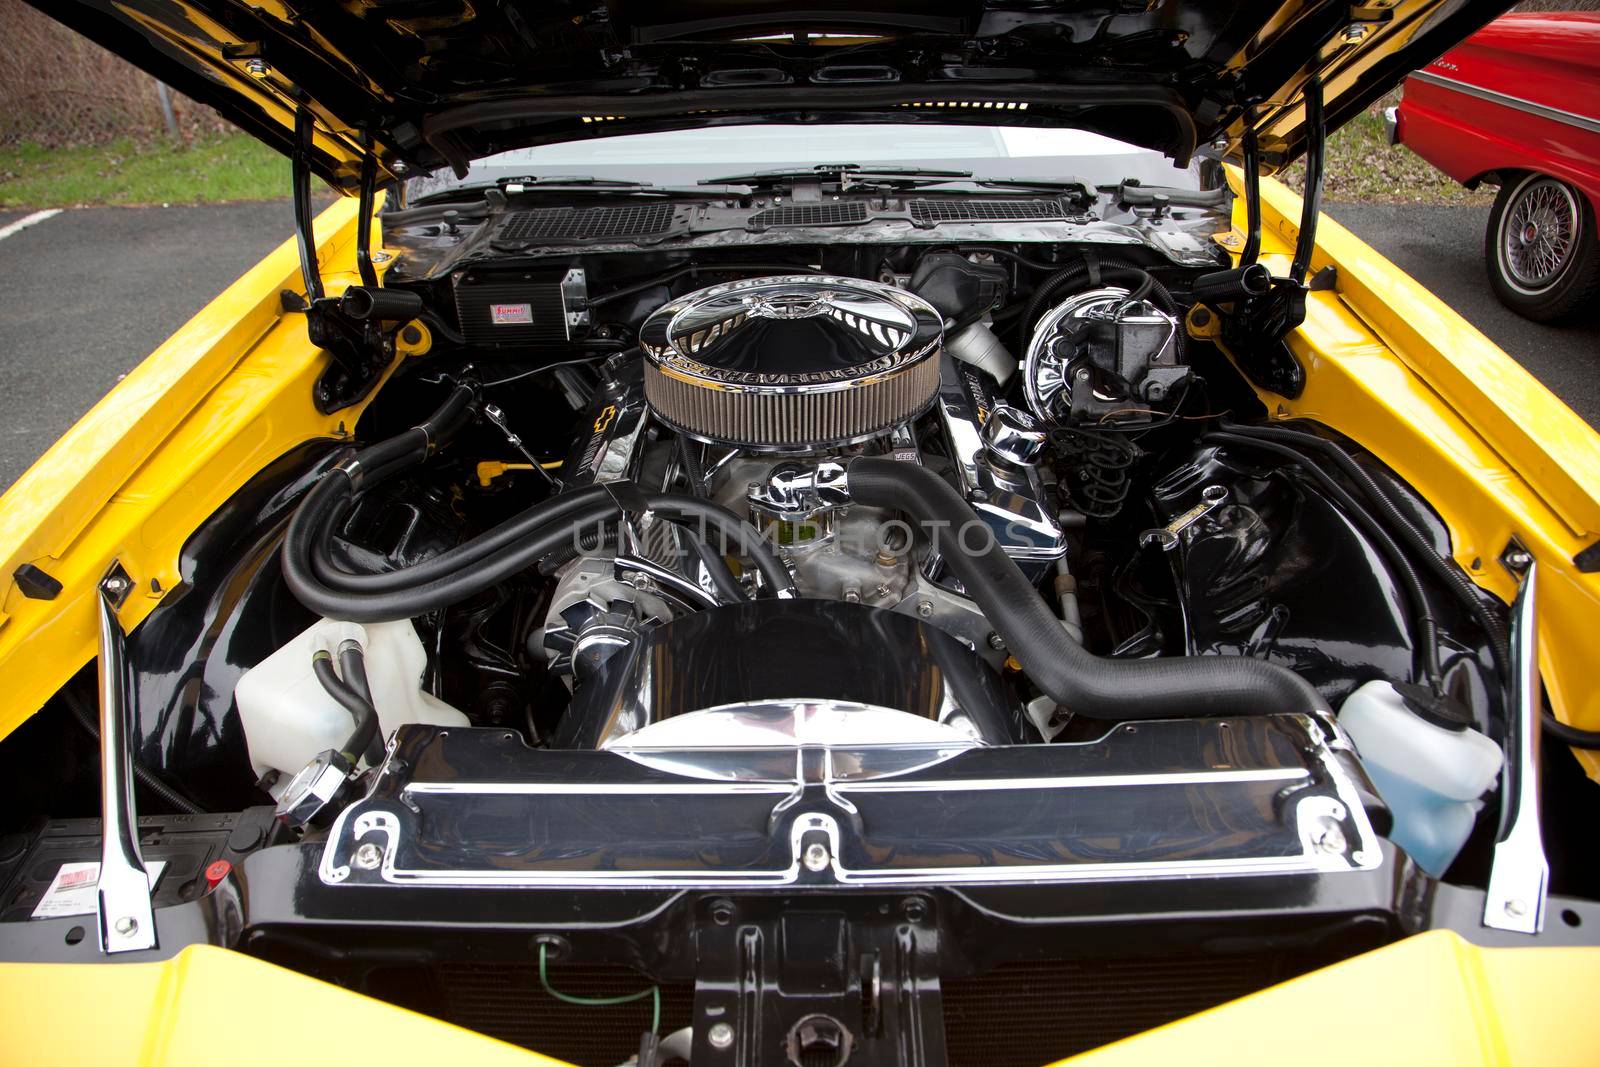 Under the hood of a 1977 Chevrolet Z28 by rustycanuck